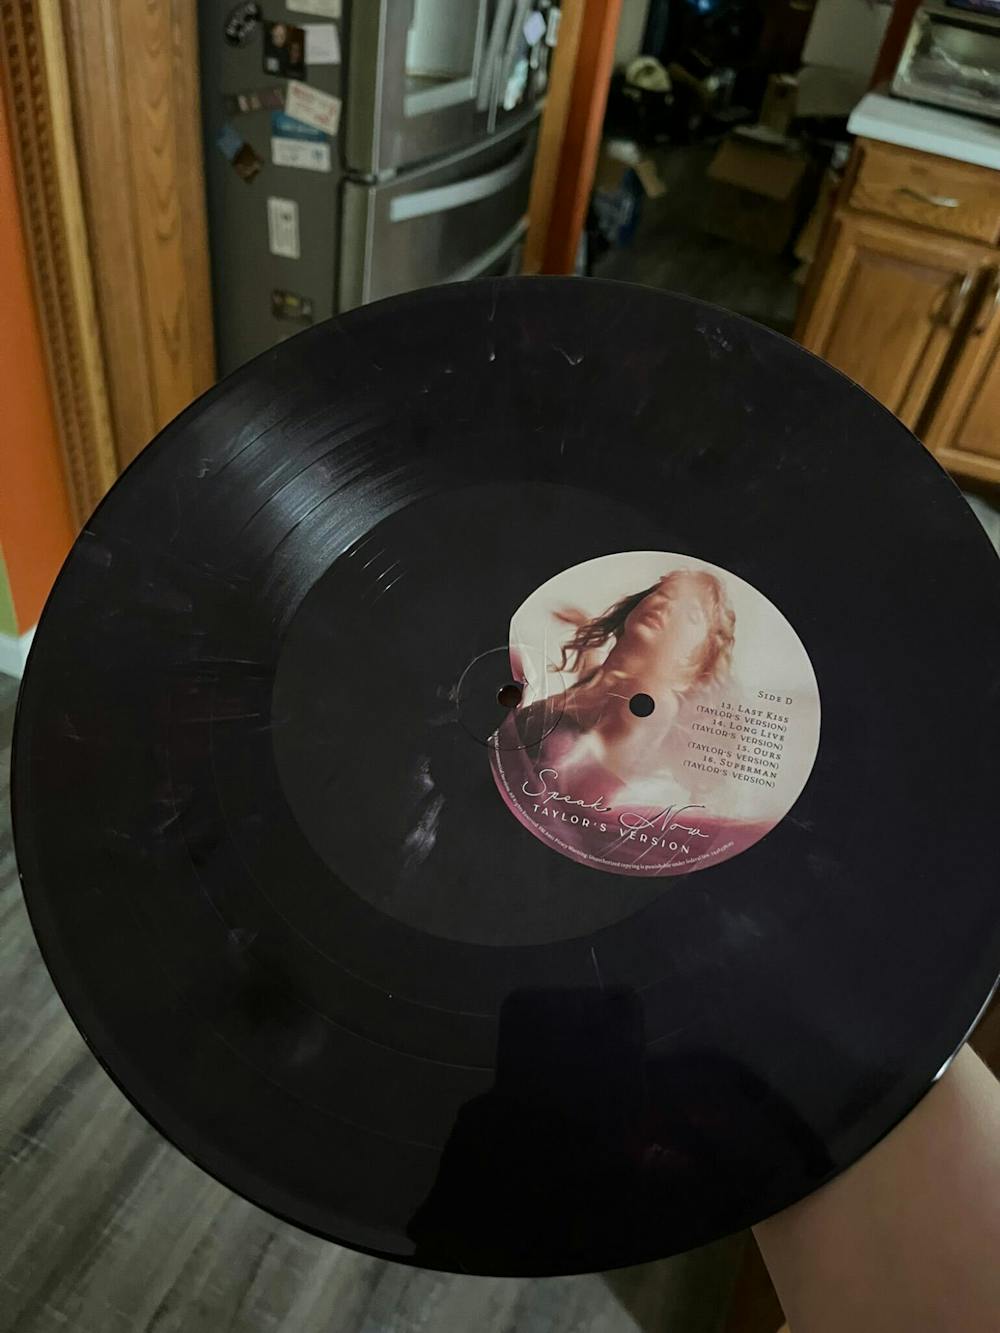 Asst. C&C Editor Stella Powers has had several bad experiences when it comes to buying merch from her favorite artists – this is her copy of “Speak Now (Taylor’s Version)” with a misplaced sticker.